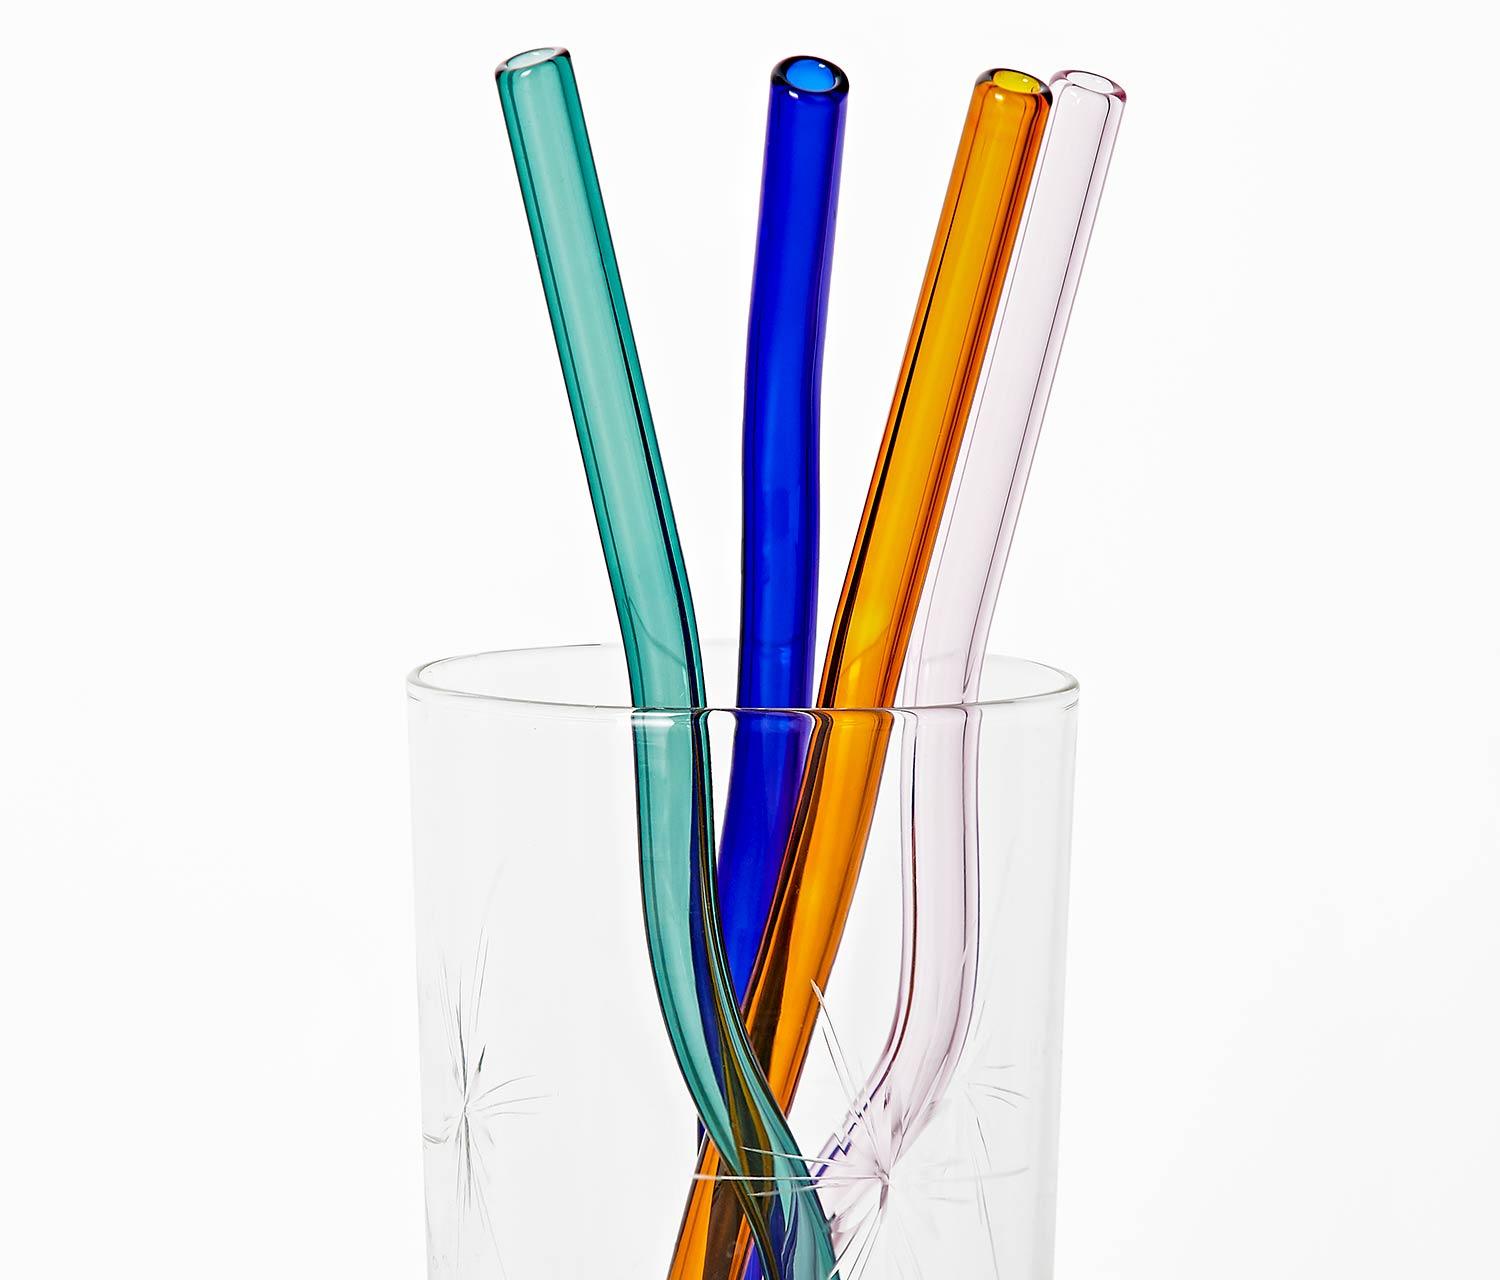 Drinking Glasses with a Straw